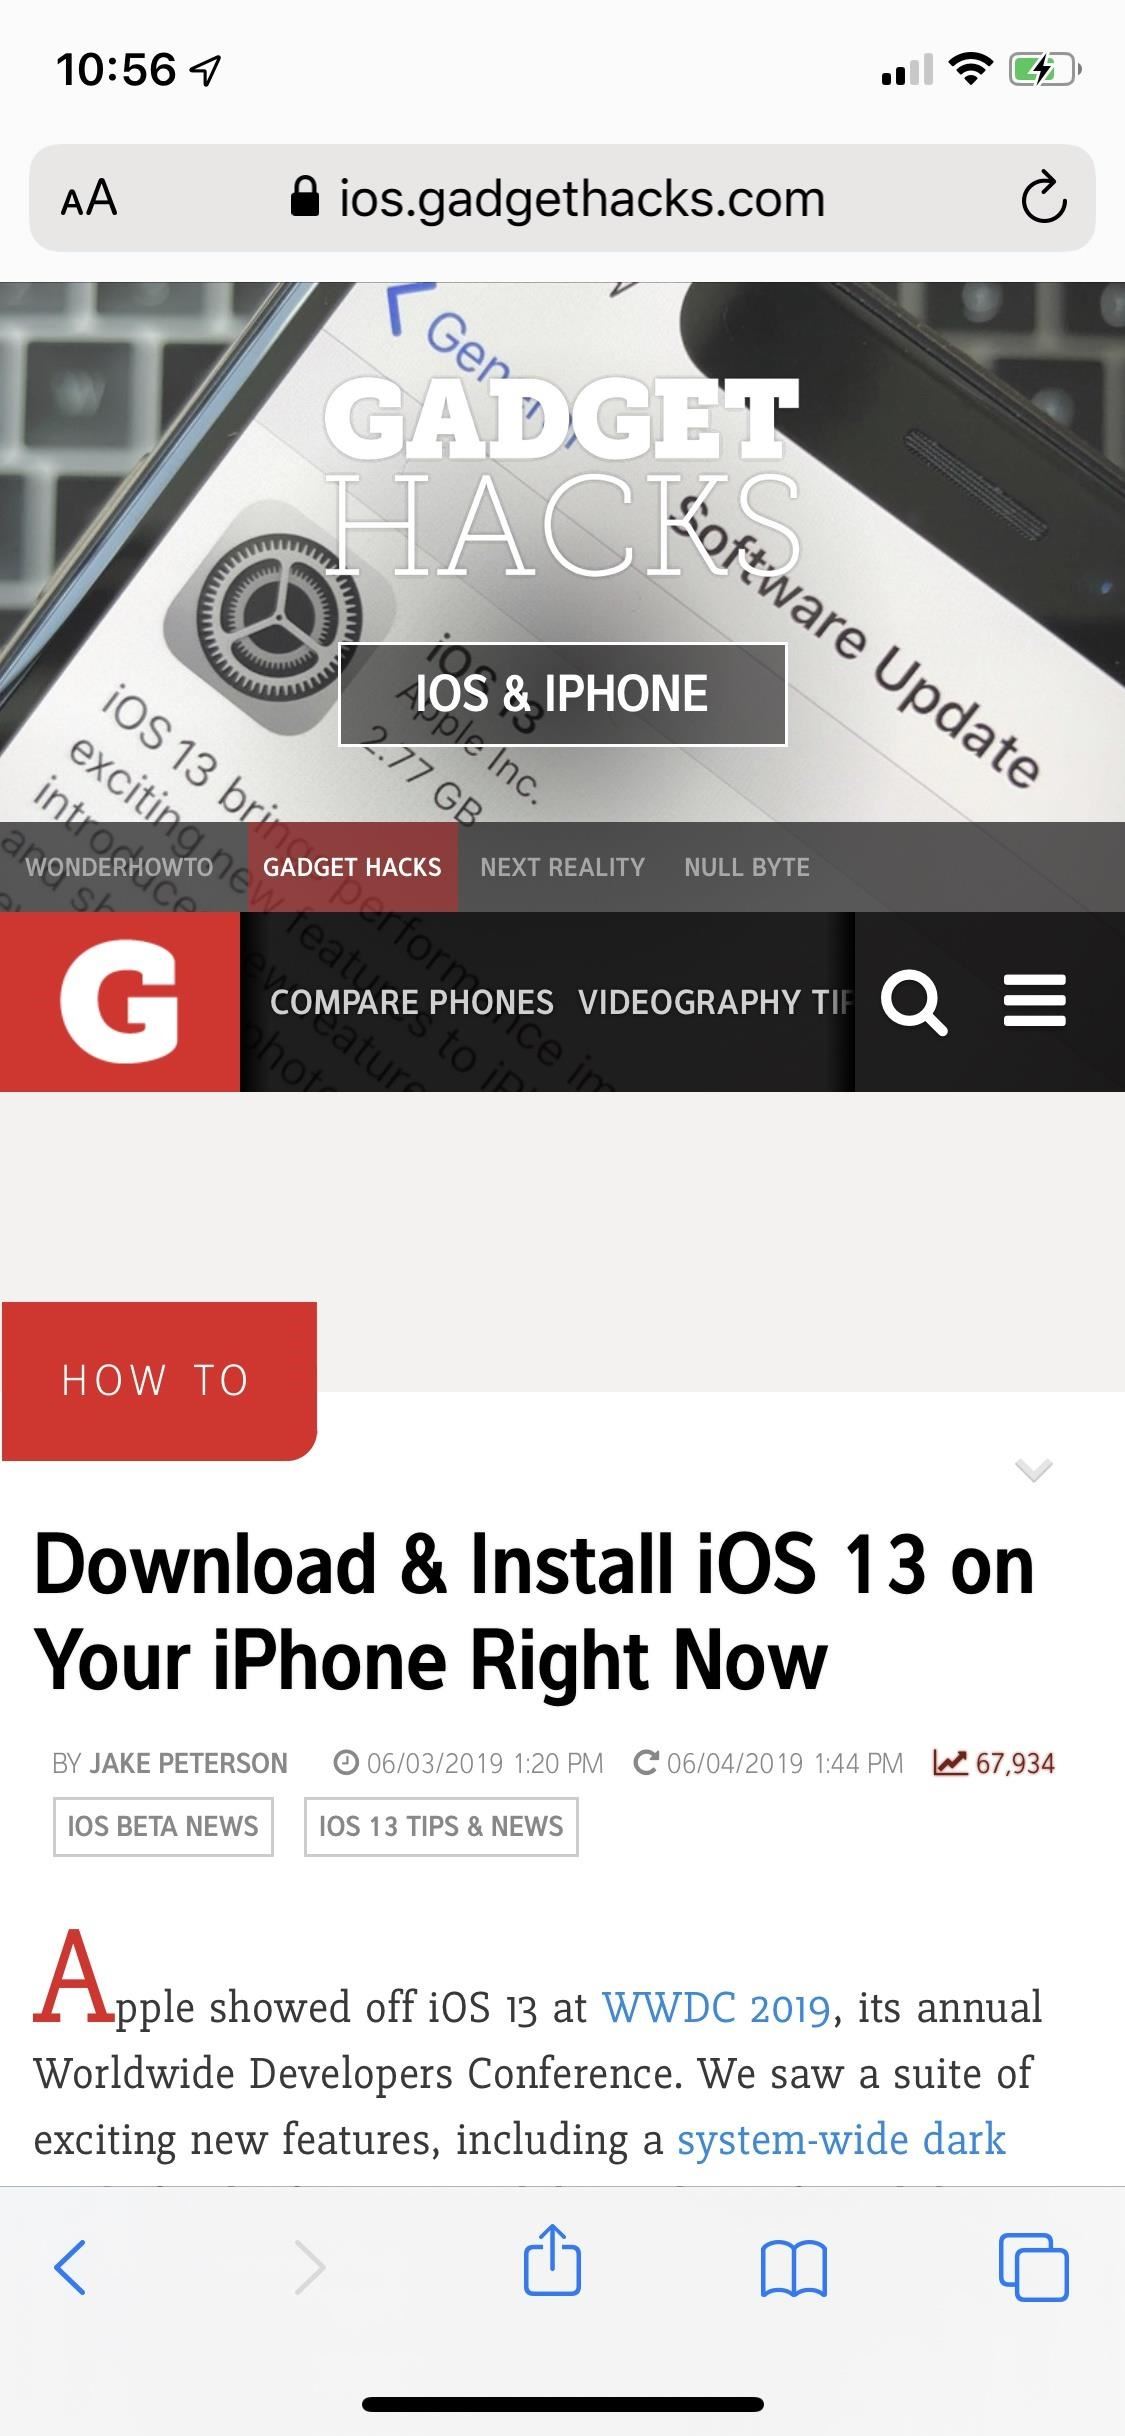 How to Take Scrolling Screenshots of Entire Webpages in iOS 13